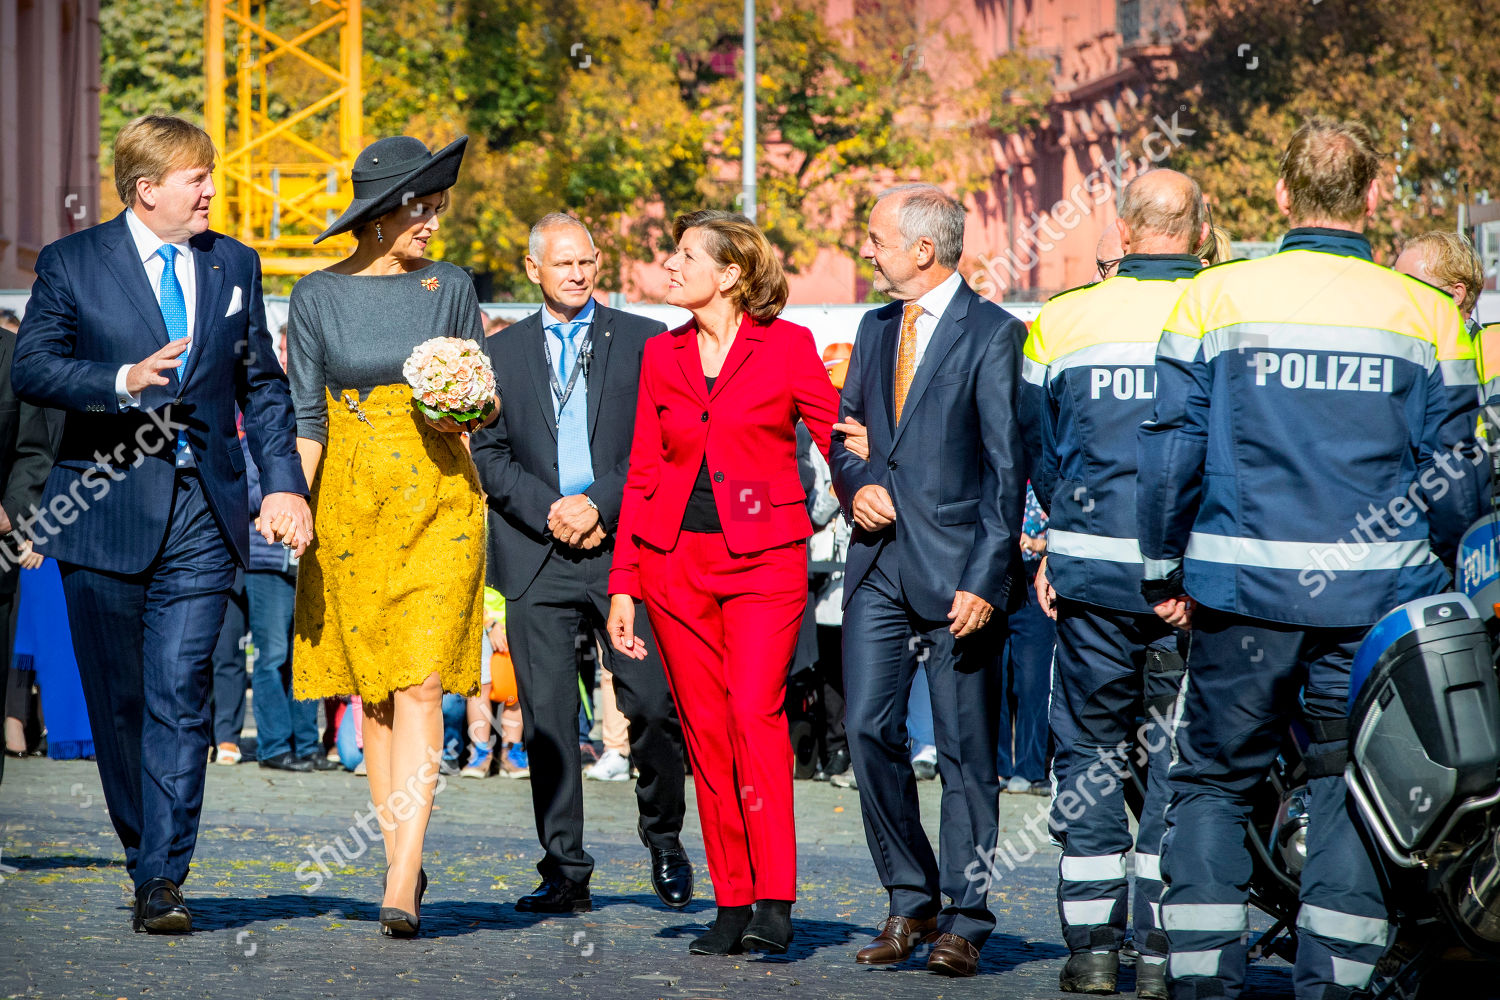 king-willem-alexander-and-queen-maxima-visit-to-germany-shutterstock-editorial-9921319j.jpg